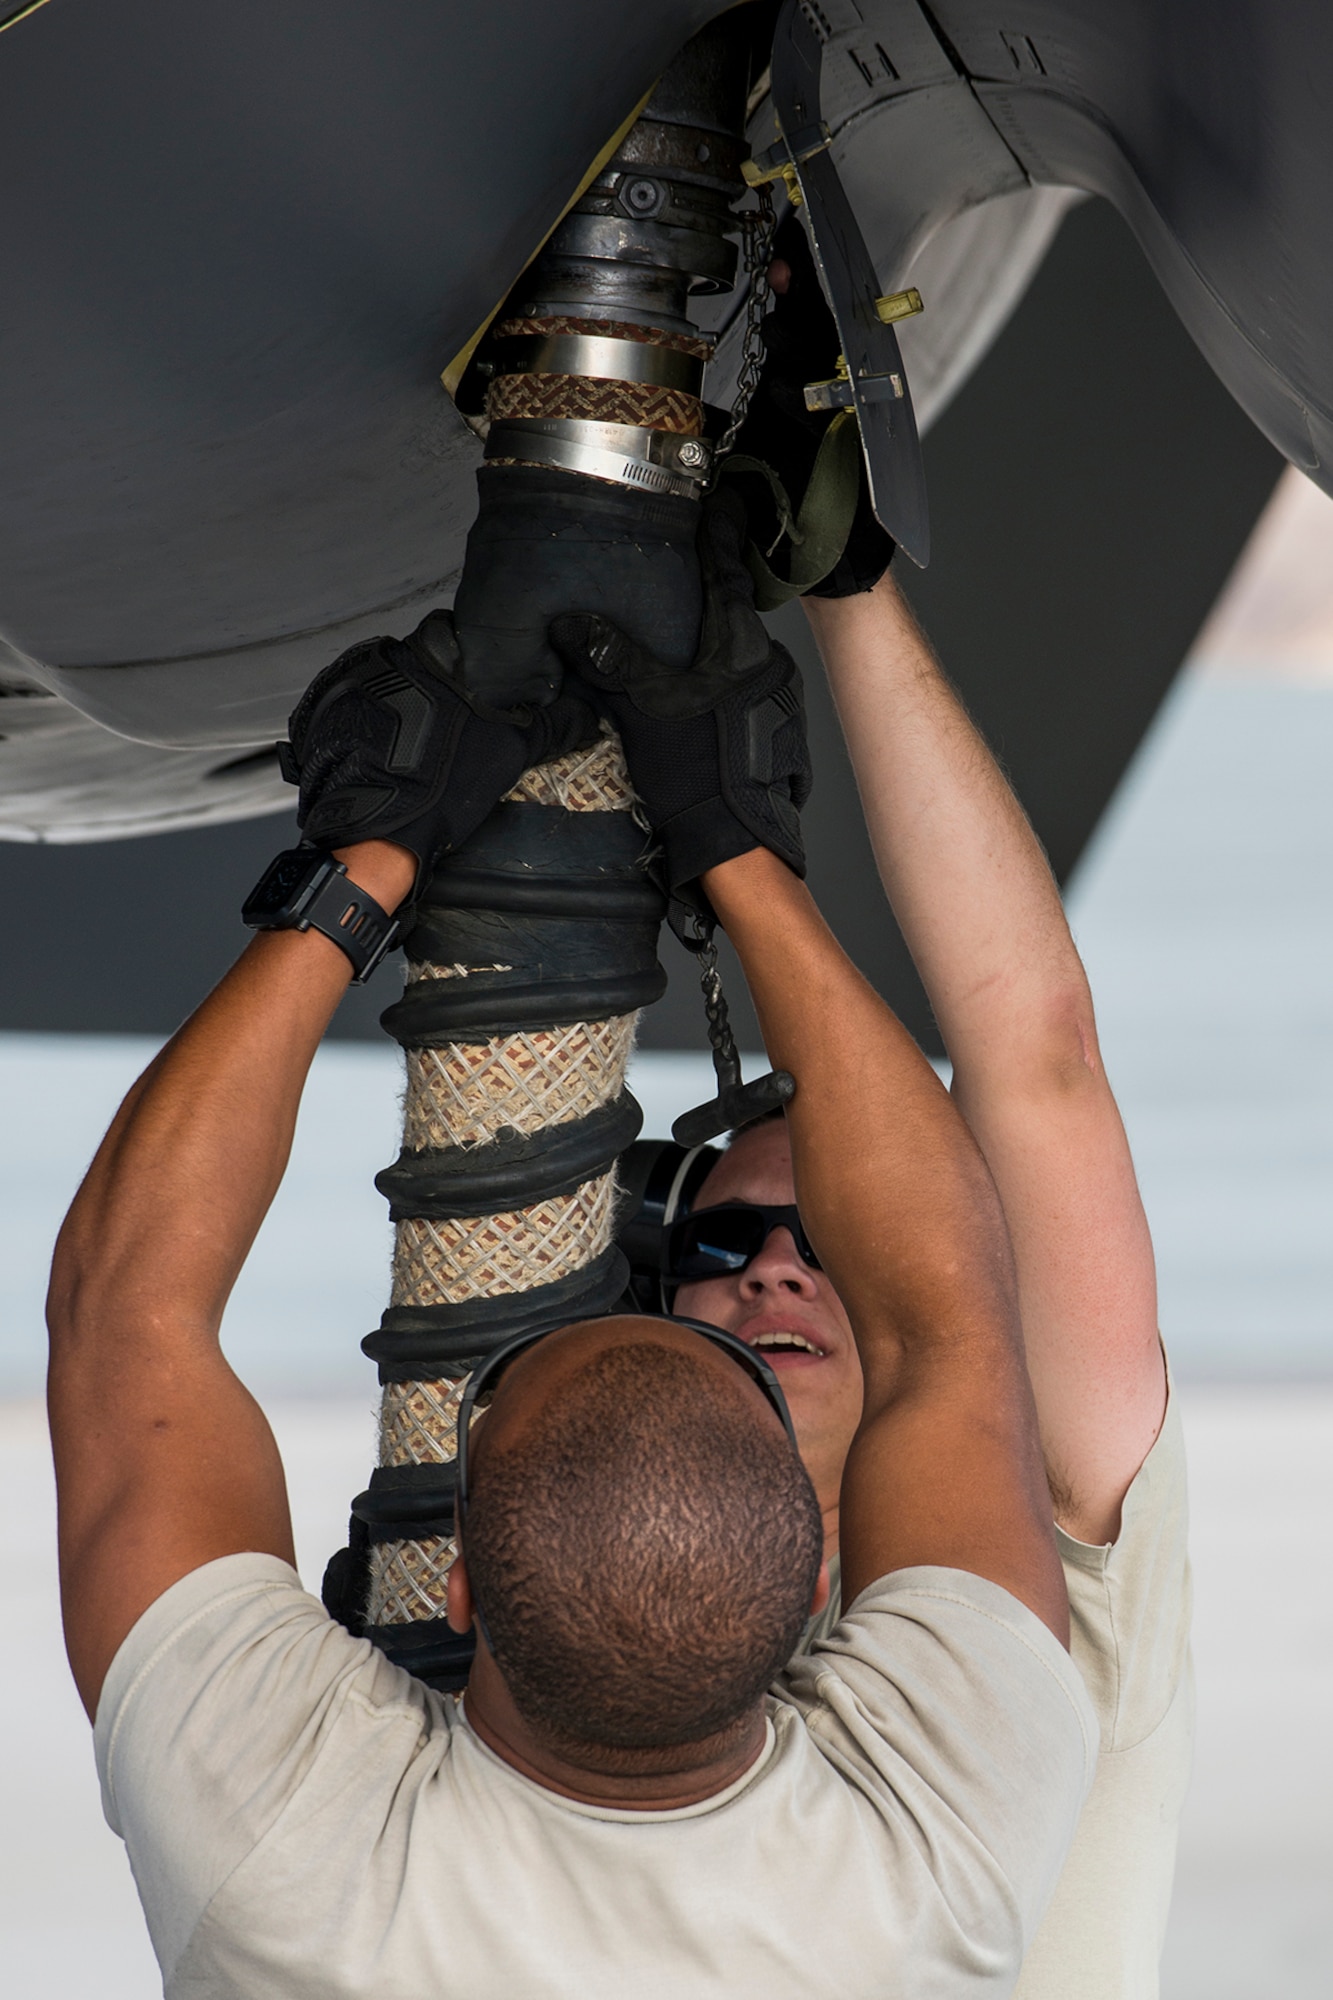 U.S. Air Force Airmen unhook a bleed air hose from the engine of a B-52H Stratofortress before a mission on June 8, 2016, Nellis Air Force Base, Nev. The Airmen are among 45 Active Duty and Air Force Reserve maintenance personnel on temporary duty at Nellis in support of the 340th Weapons Squadron. (U.S. Air Force photo by Master Sgt. Greg Steele/Released)